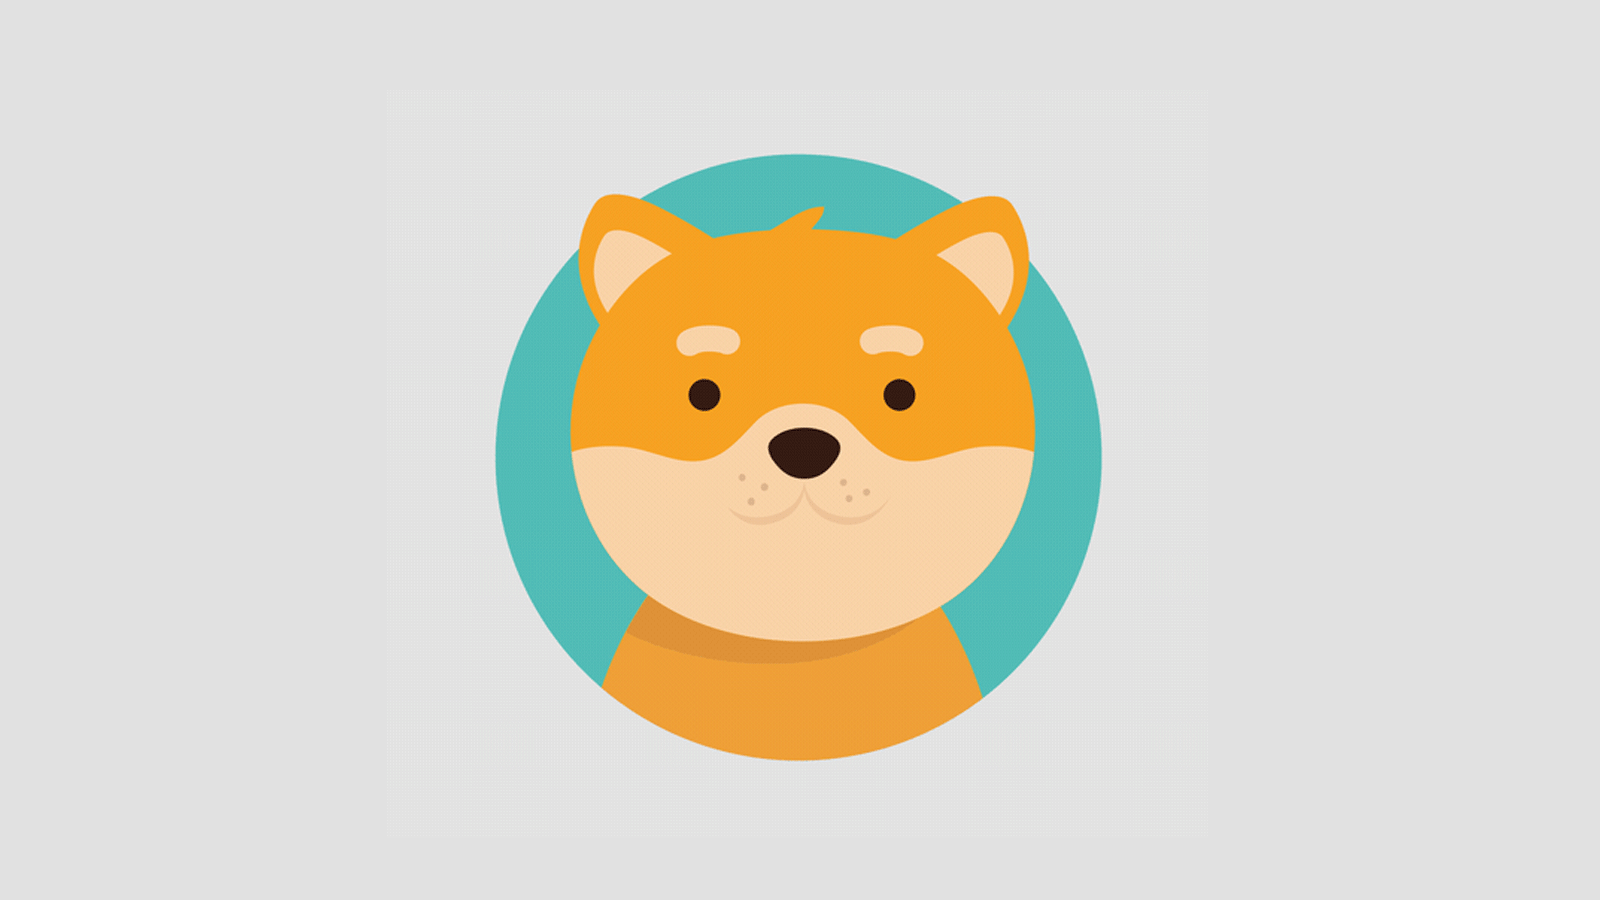 An animation of an illustrated orange dog, smiling.